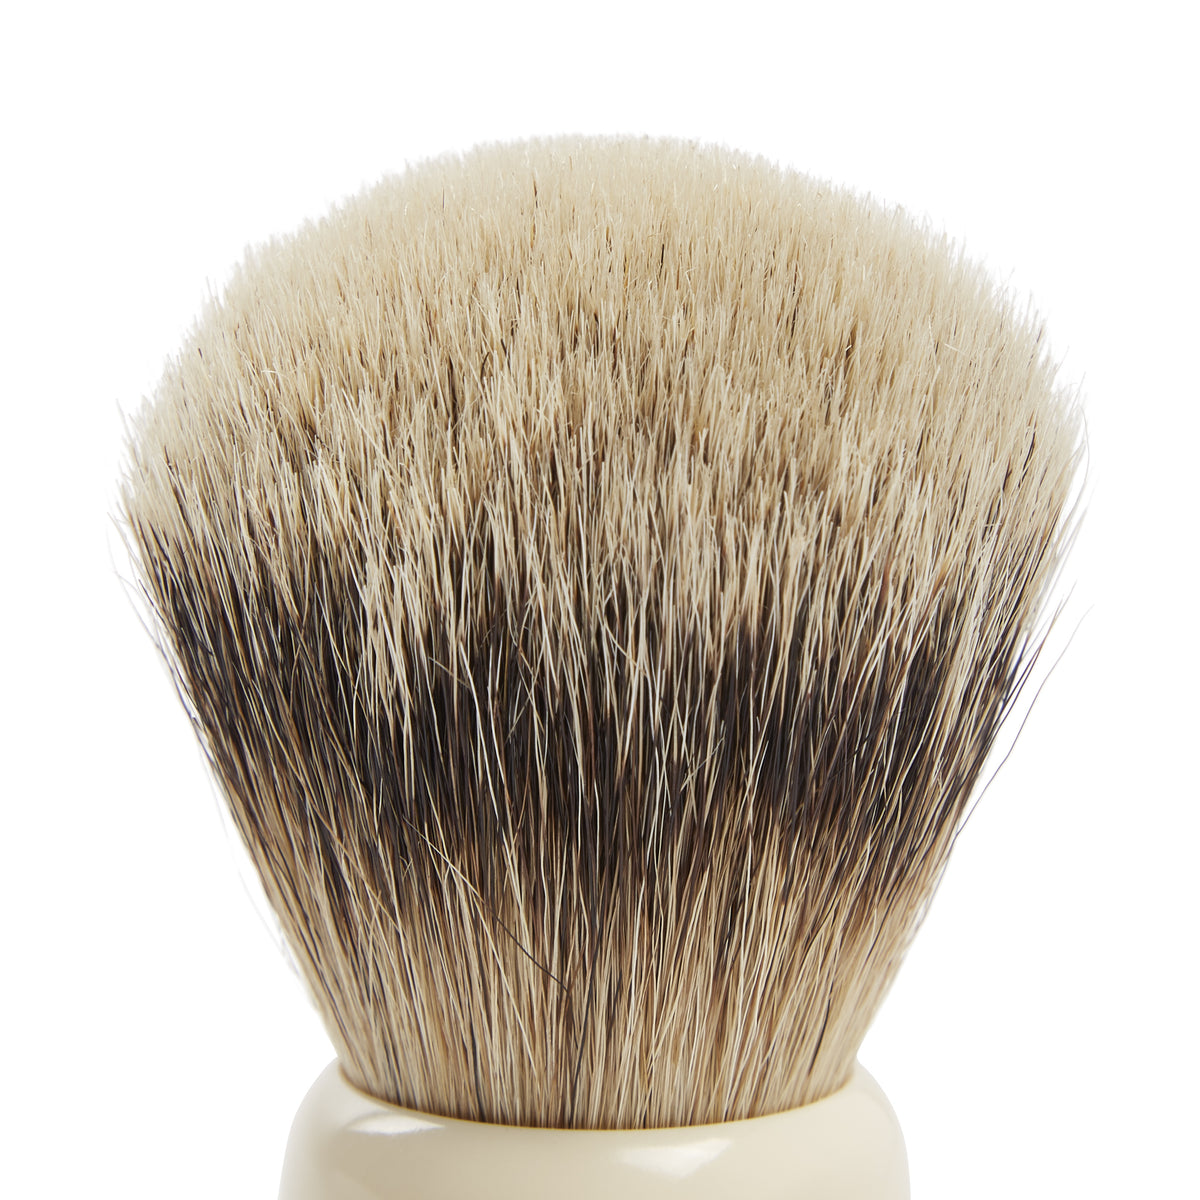 A Sovereign Grade Silvertip Badger Brush from KirbyAllison.com on a white background.